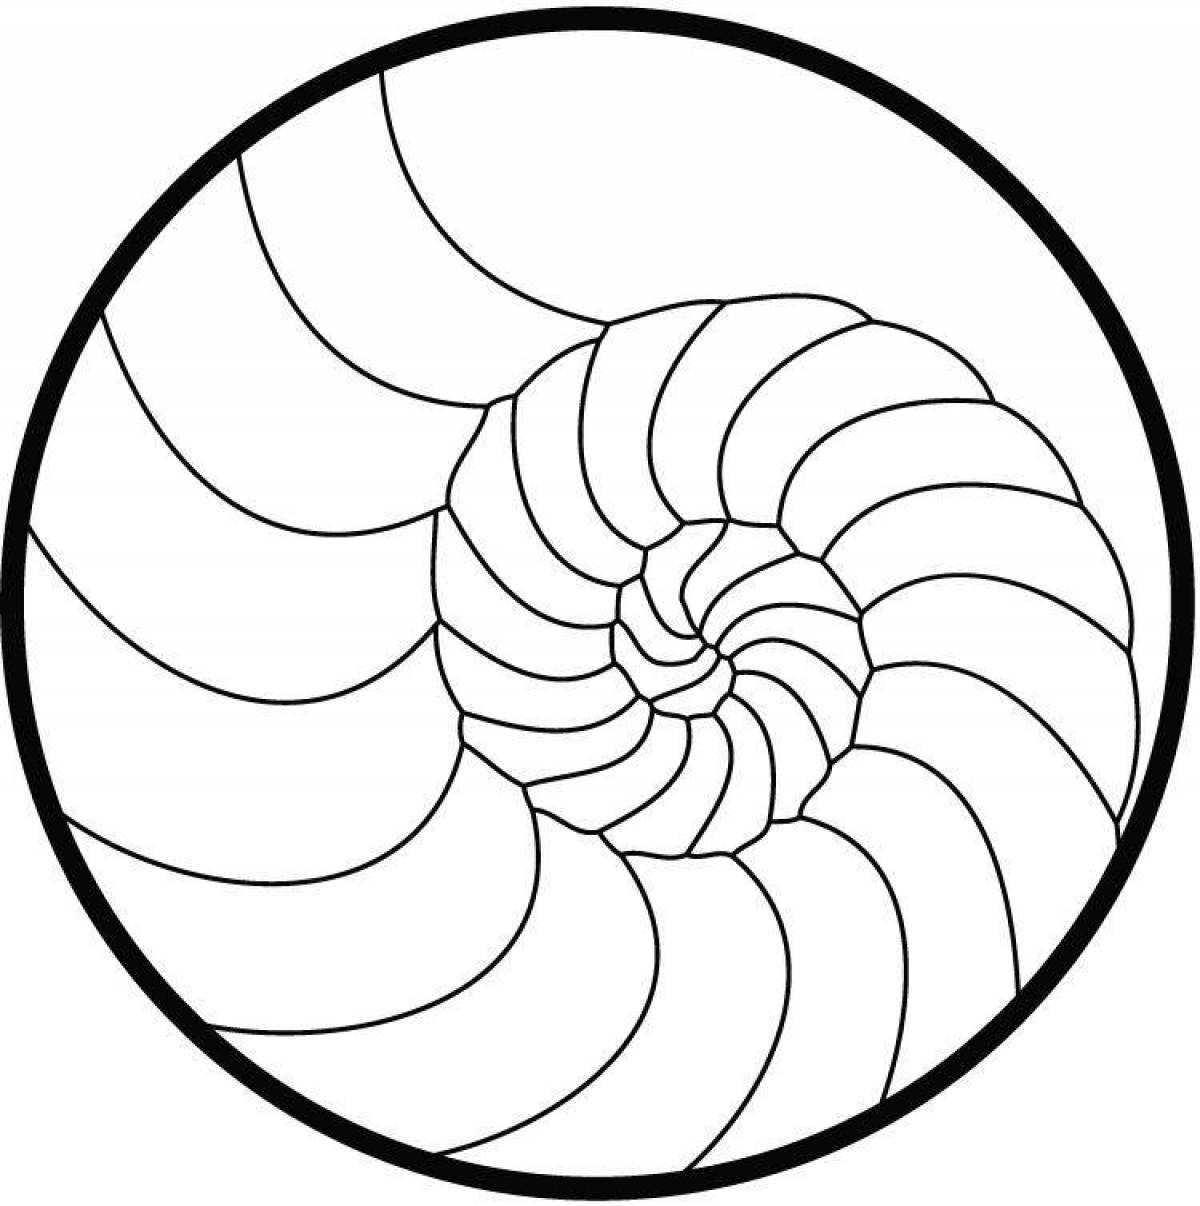 Colourful Circular Spiral Create Coloring Page